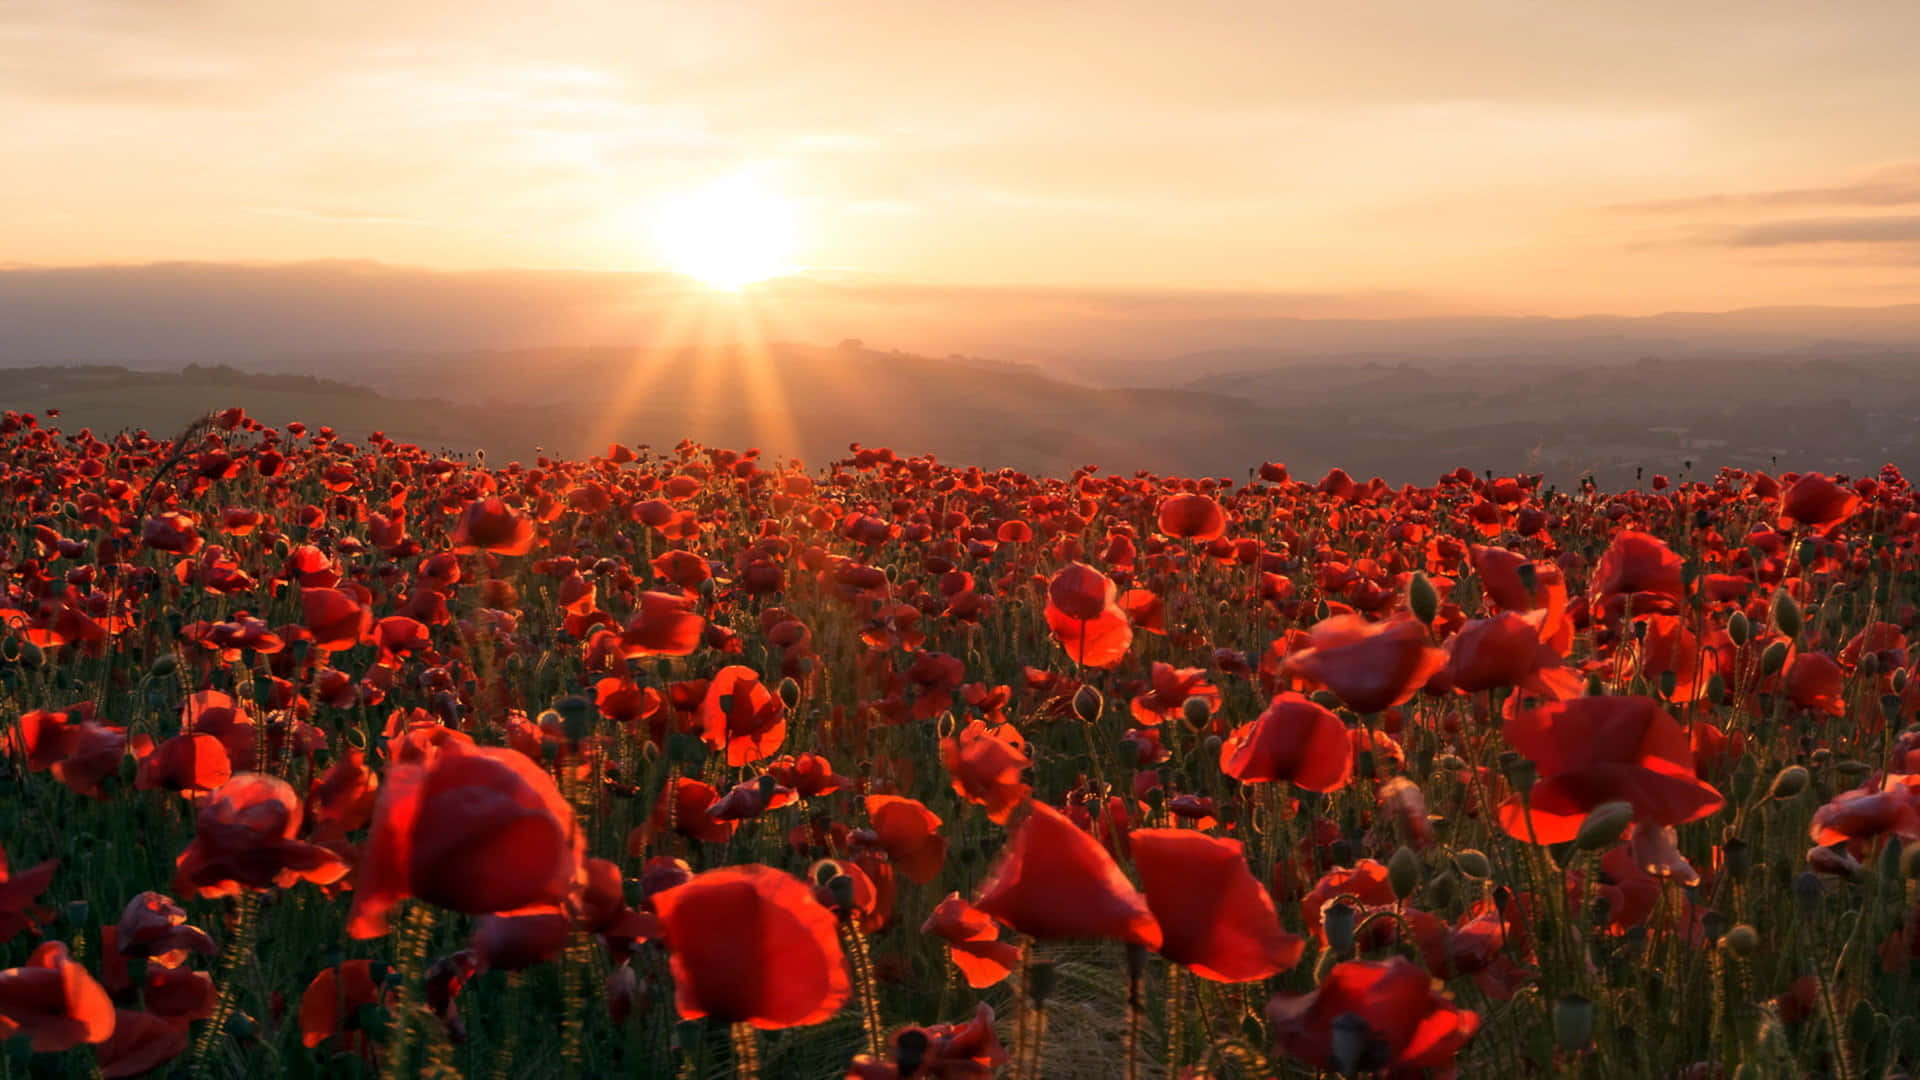 Celebrate the four seasons with the vibrant beauty of Poppy